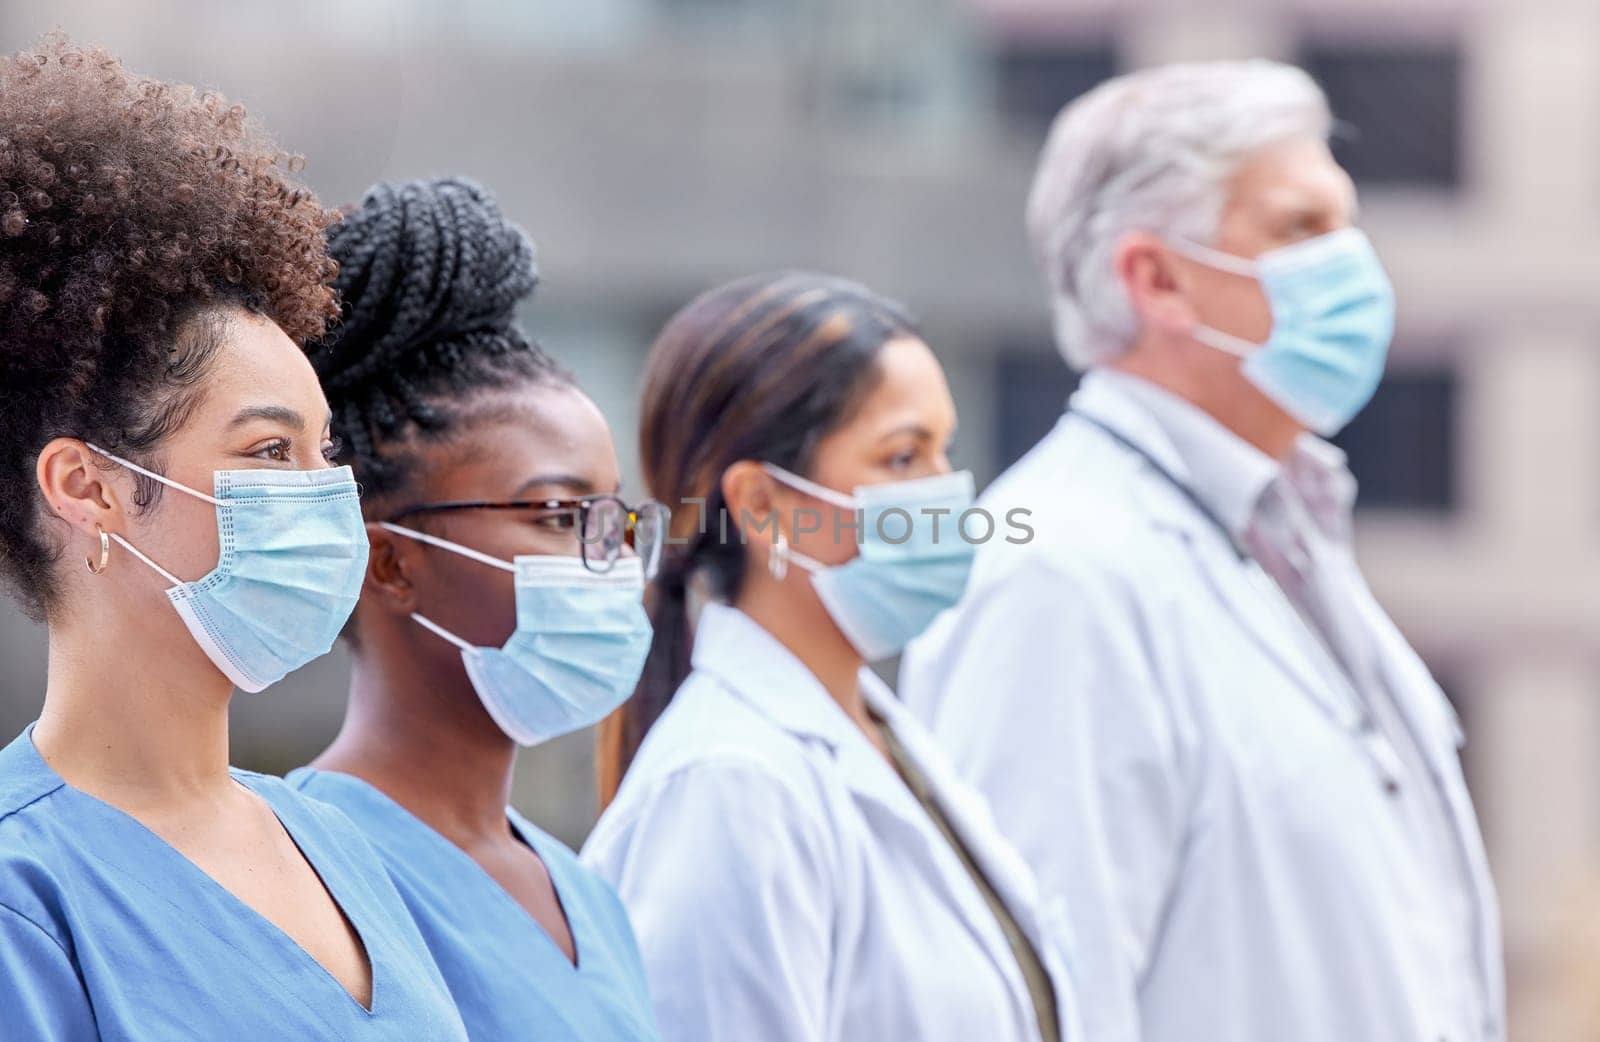 City, healthcare and doctors with mask for teamwork, collaboration and support for clinic staff. Hospital, nursing and men and women in row for medical care, service and wellness in pandemic safety.